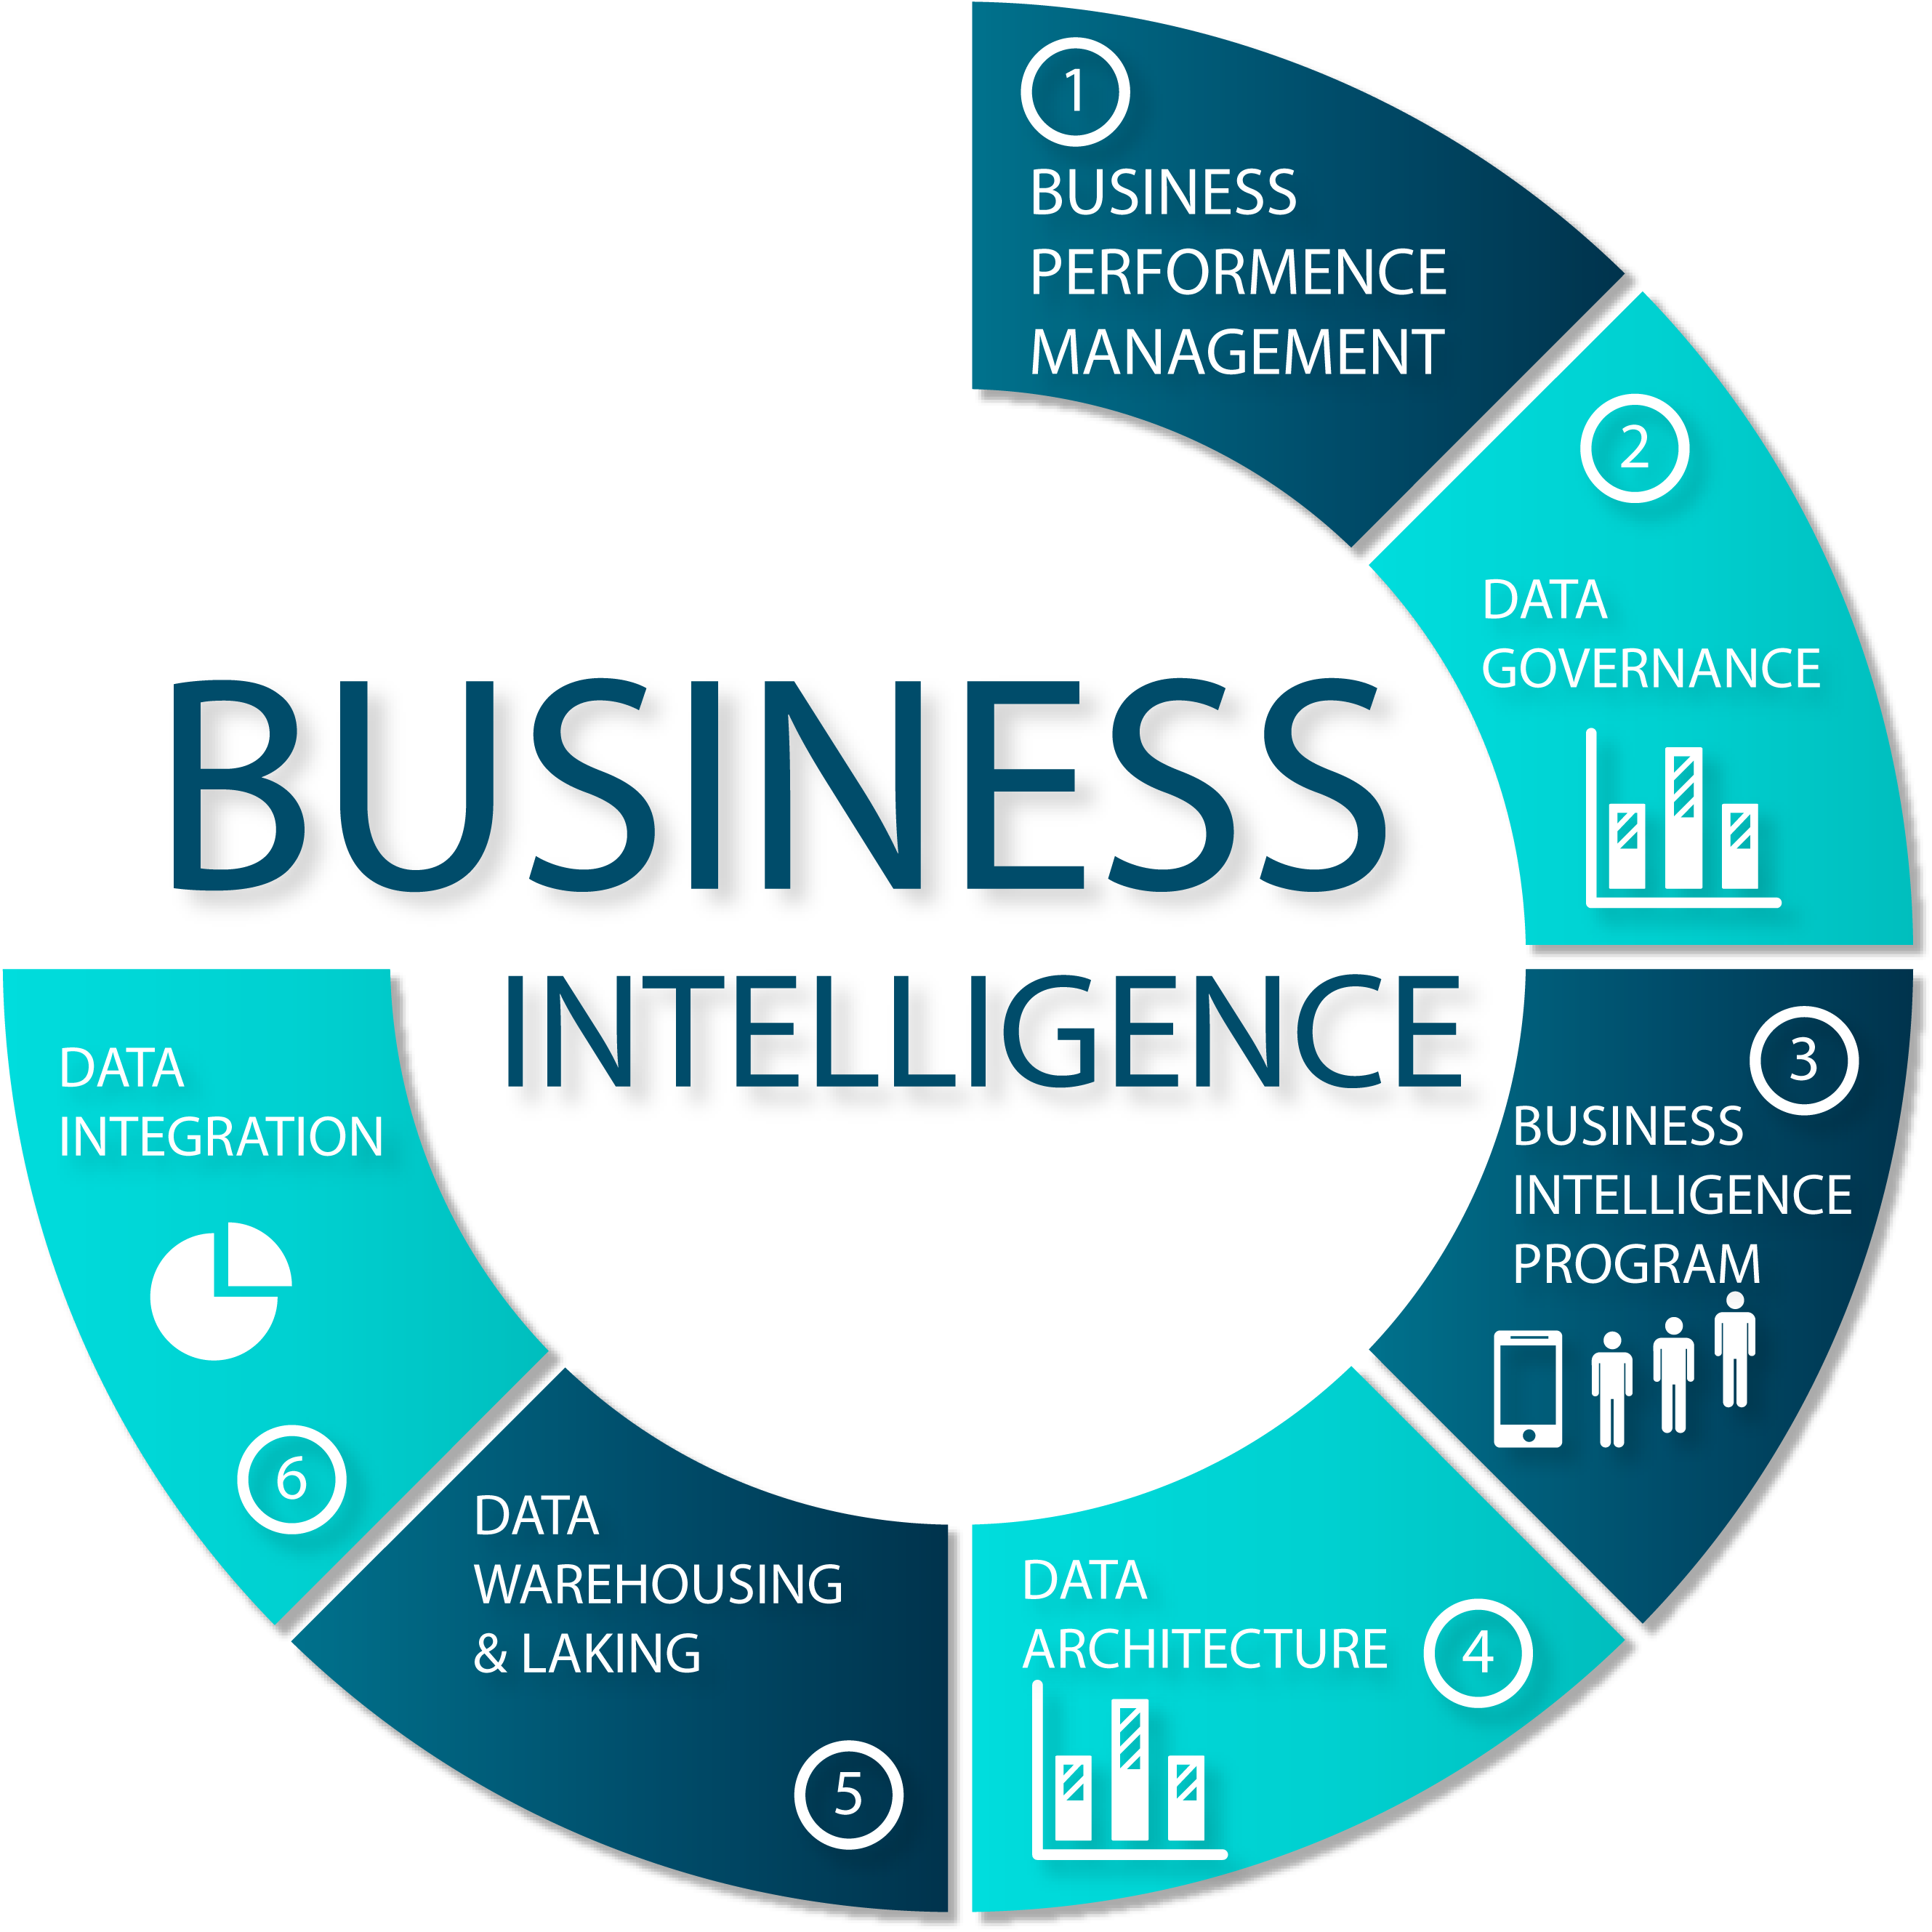 What technologies do Business Intelligence Analyst use?